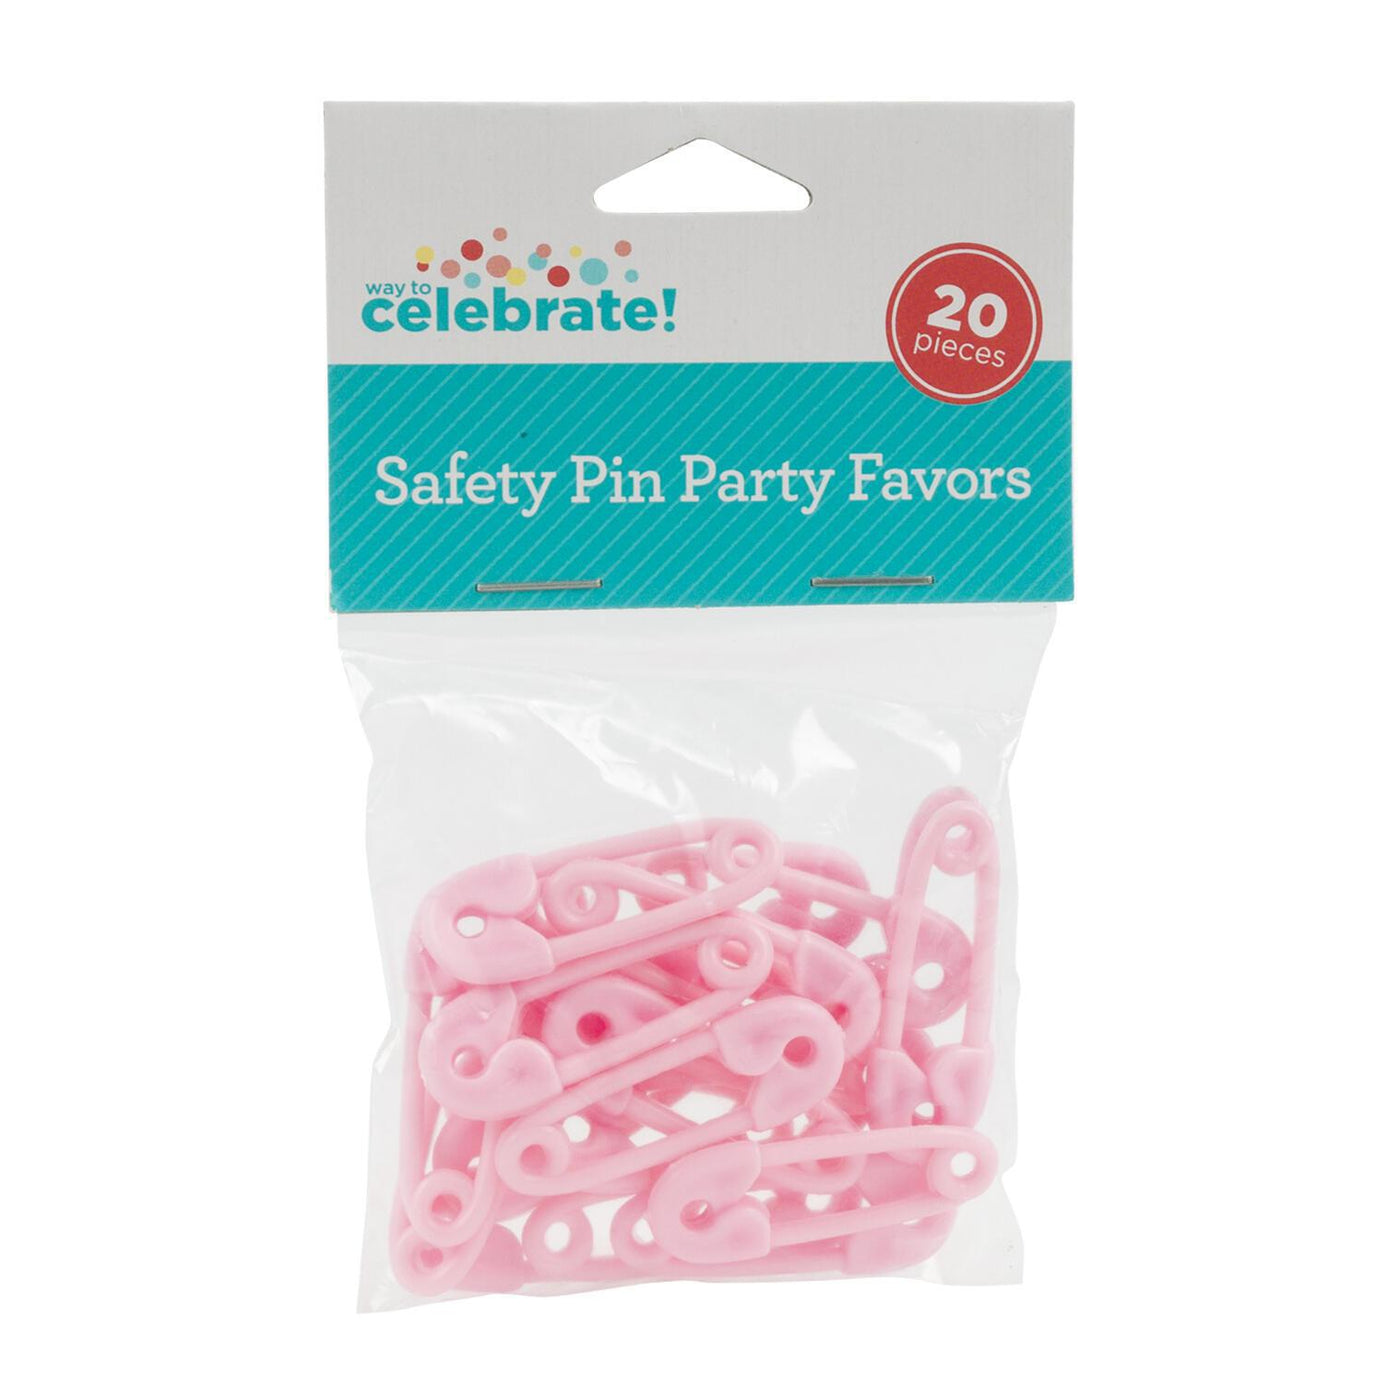 Pink Safety Pin Party Favor (20 Count)